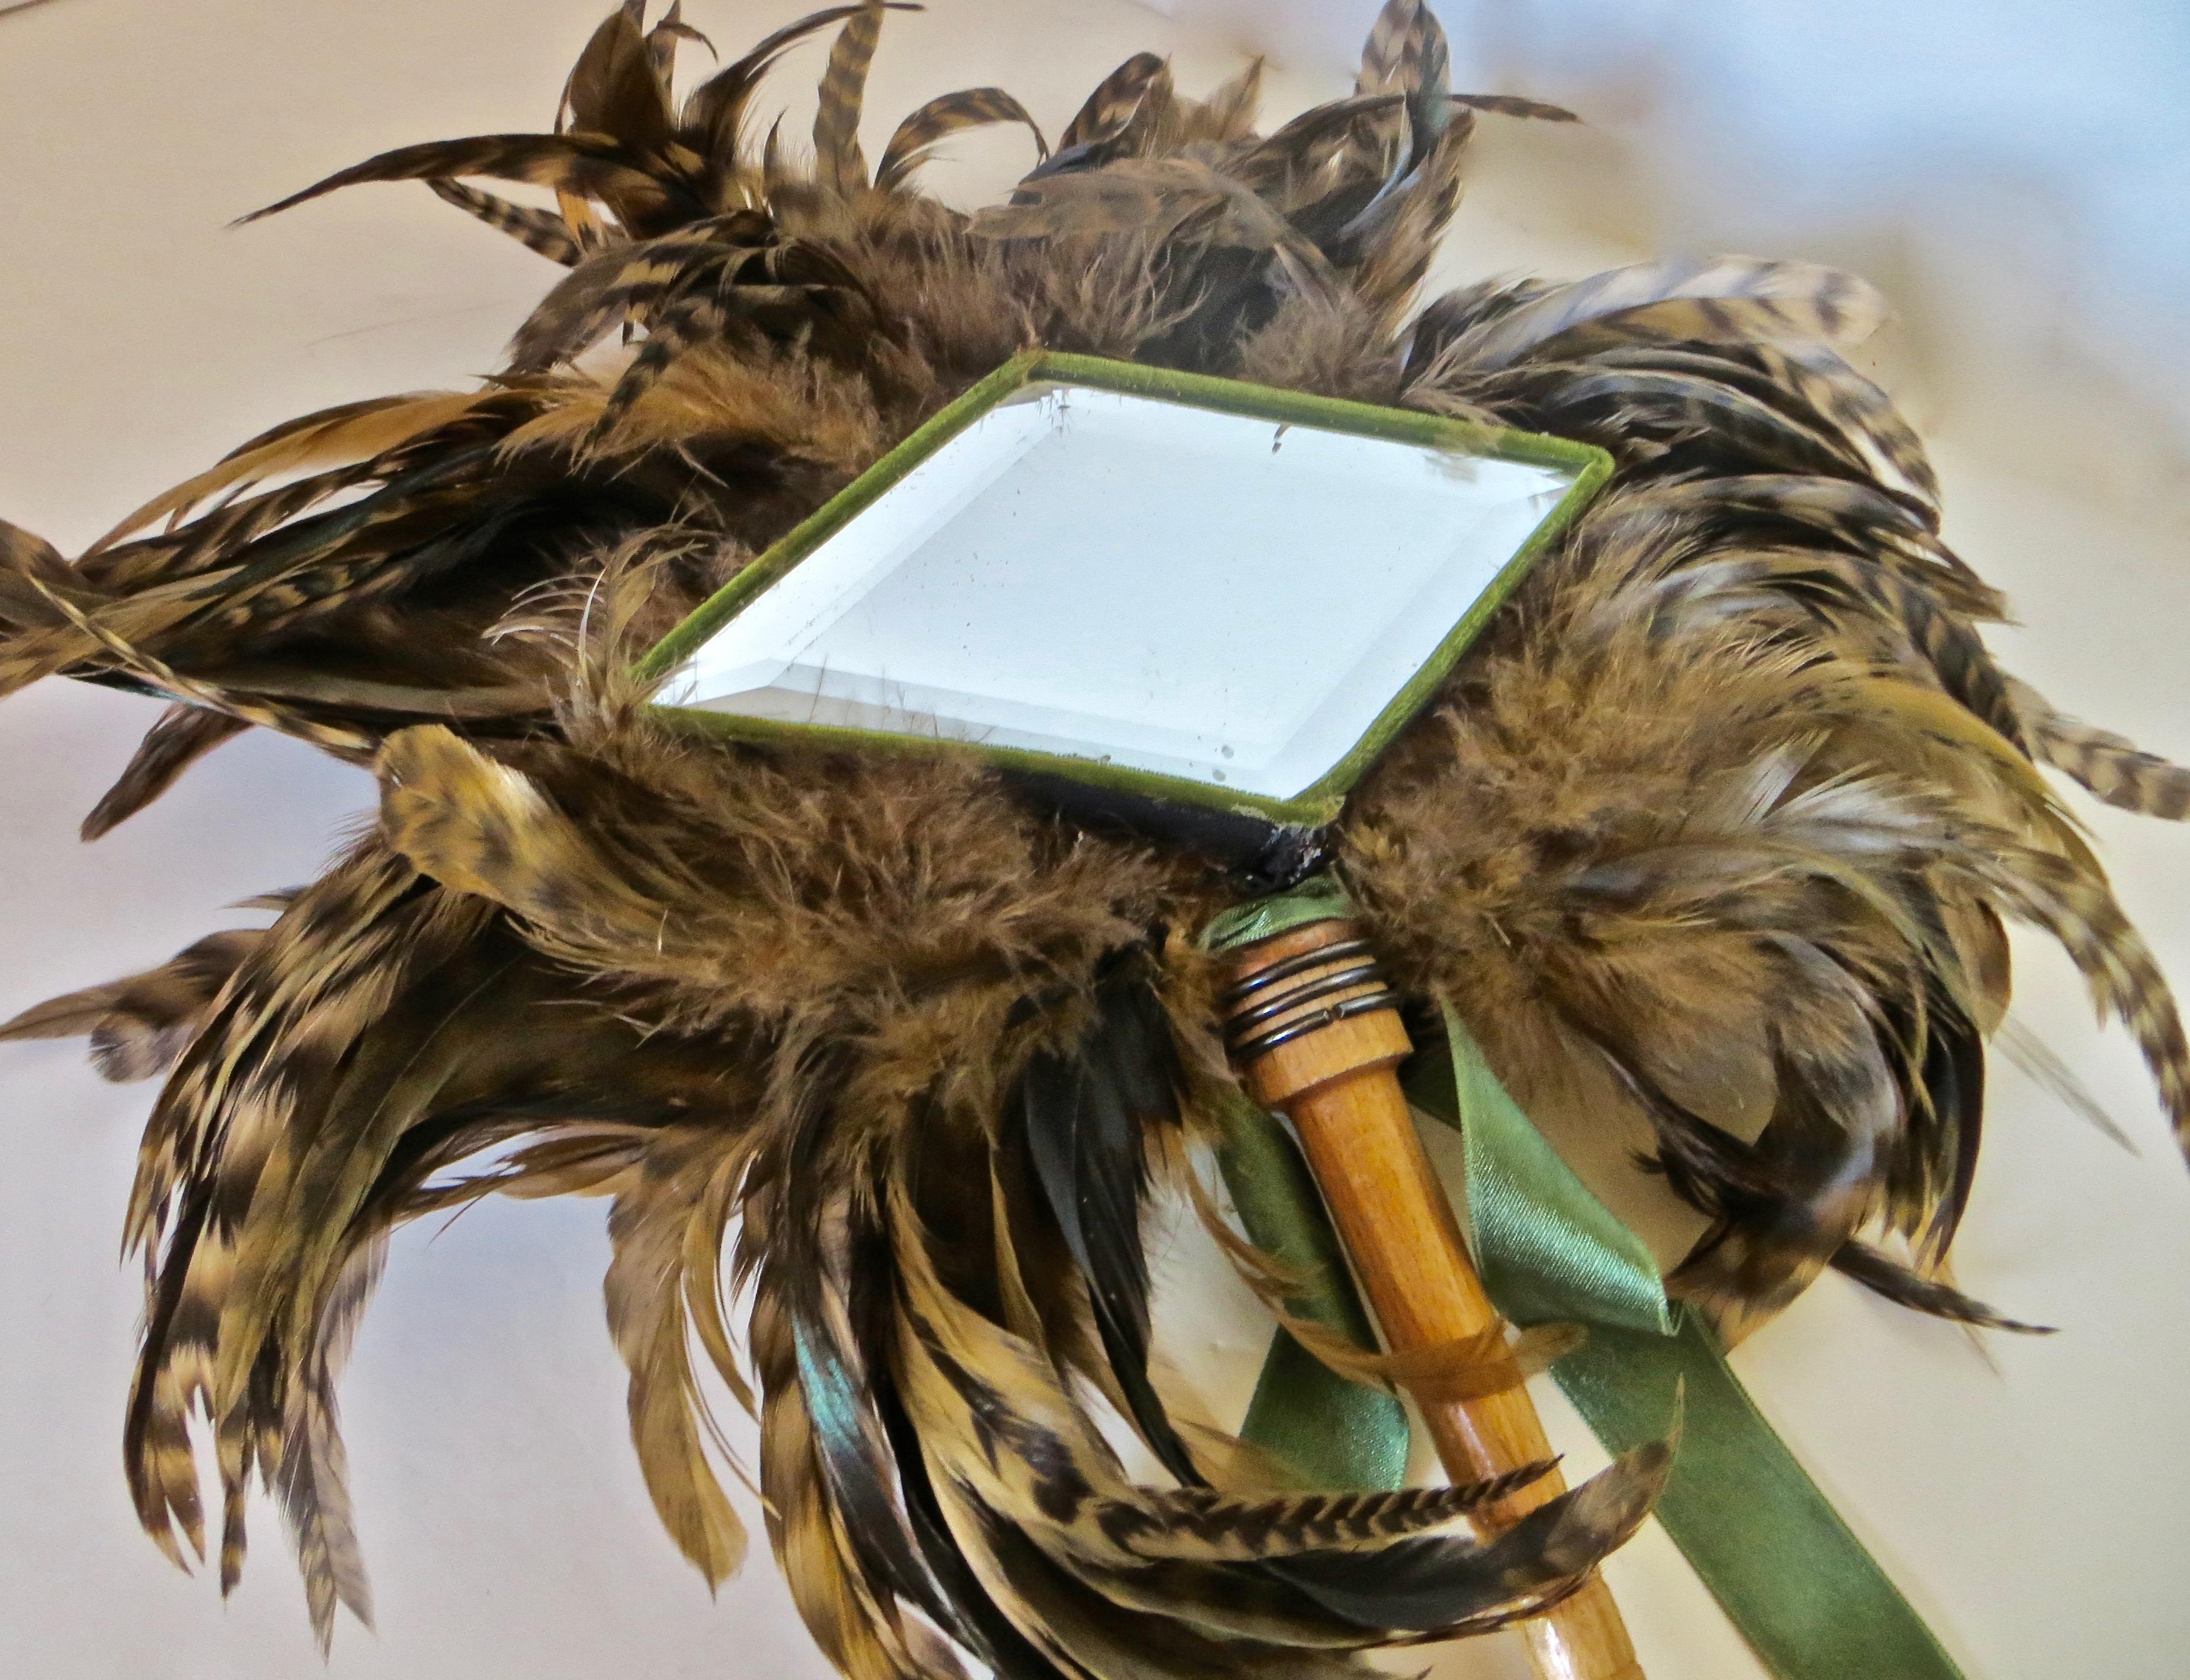 Very unique one of a kind item, this is a hand held Victorian mirror, very fancy with pheasant wing feathers galore and a green satin ribbon 